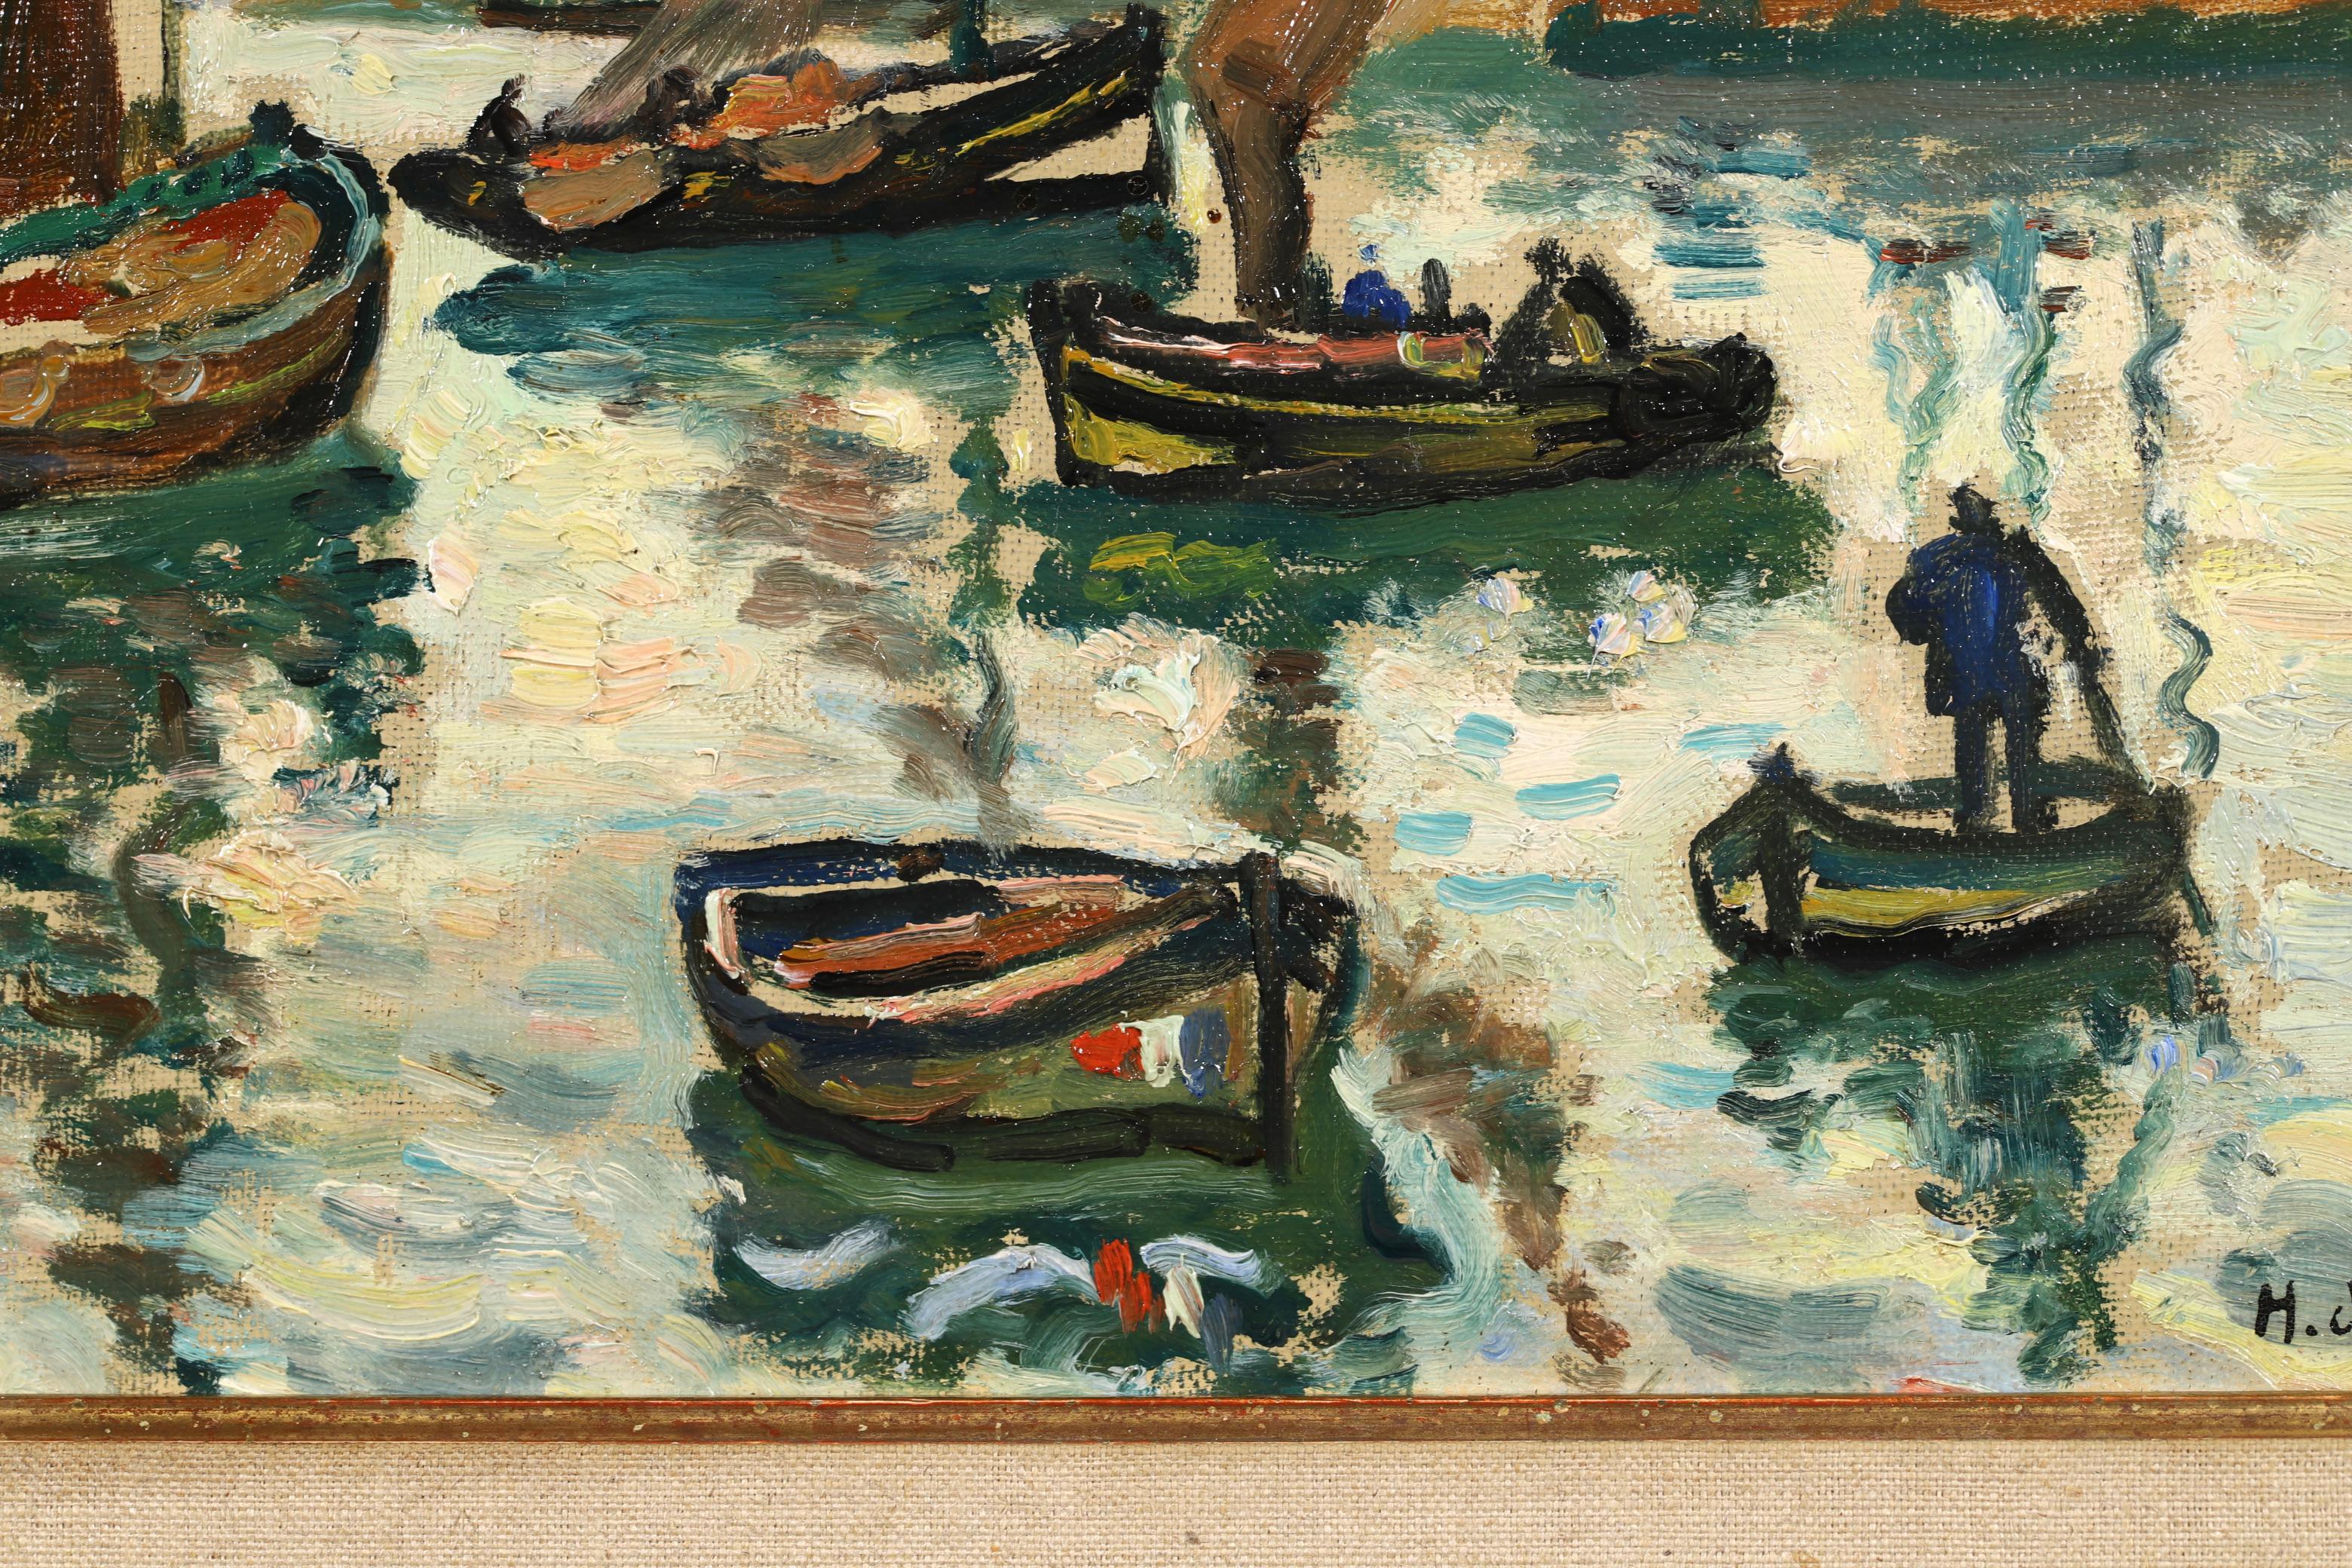 Signed oil on board figures in seascape painting circa 1910 by French post impressionist painter Henri Liénard de Saint-Délis. The work depicts sailing boats in the harbour flying the French Tricolore flag.

Signature:
Signed lower